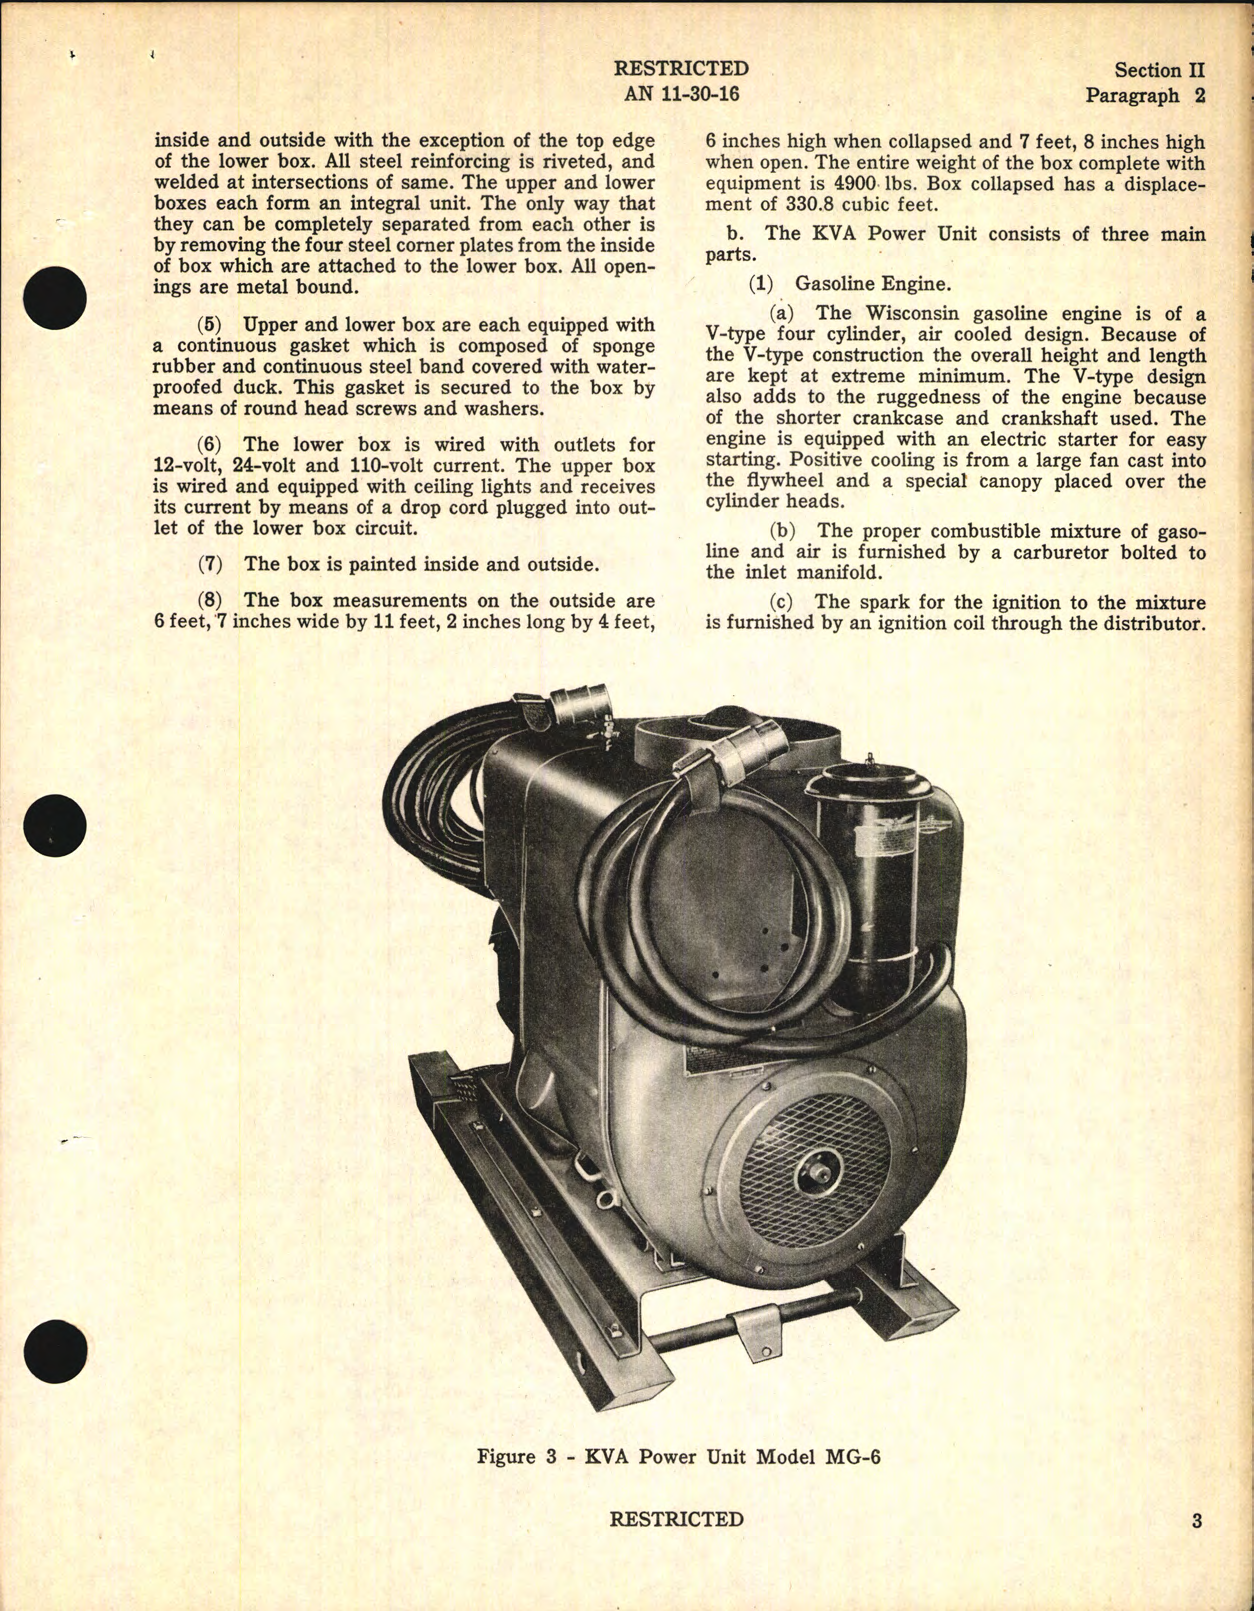 Sample page 7 from AirCorps Library document: Handbook of Instructions with Parts Catalog for Field Bombsight Repair Shop Box